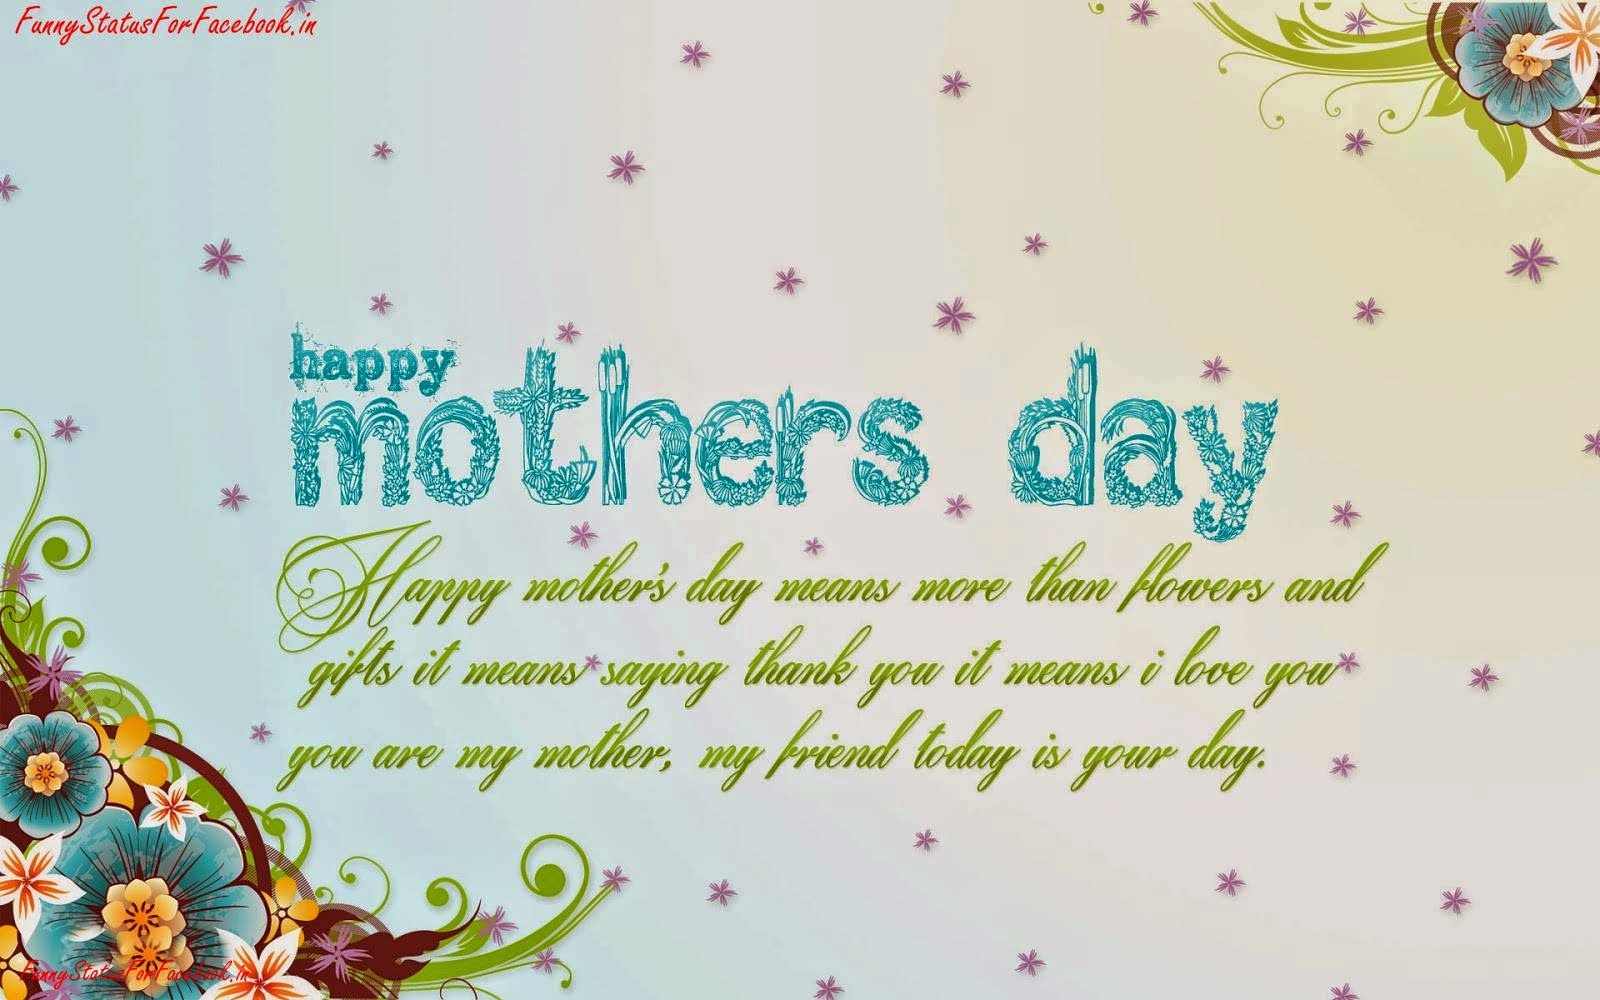 Happy Mothers Day Quotes Greeting Cards Wallpapers - Mother's Day Card Quotes From All - HD Wallpaper 